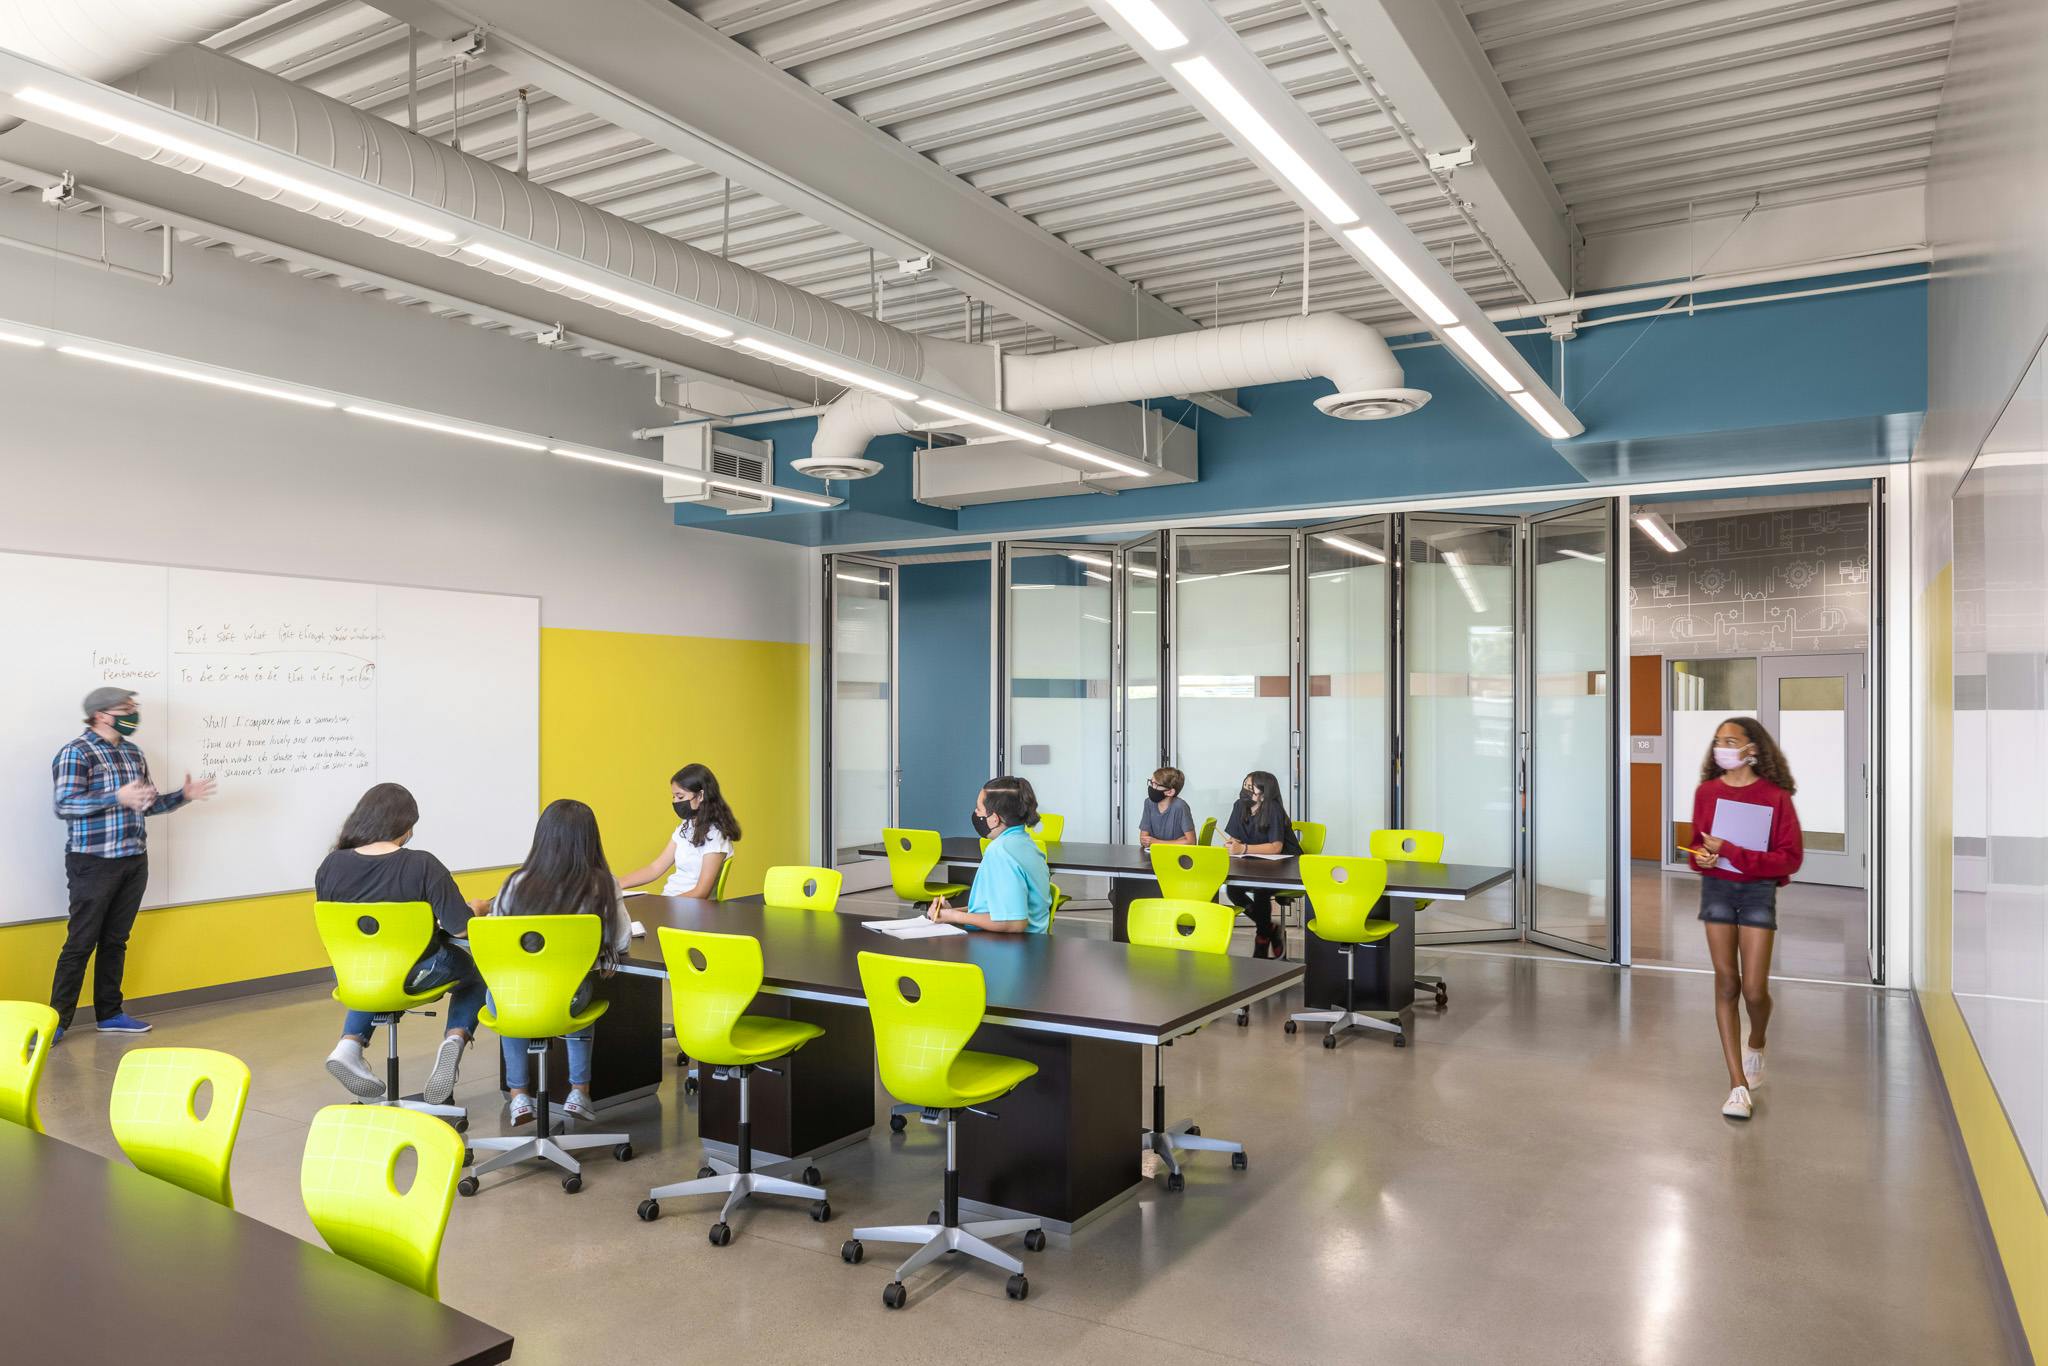 NanaWall sound control solutions for schools